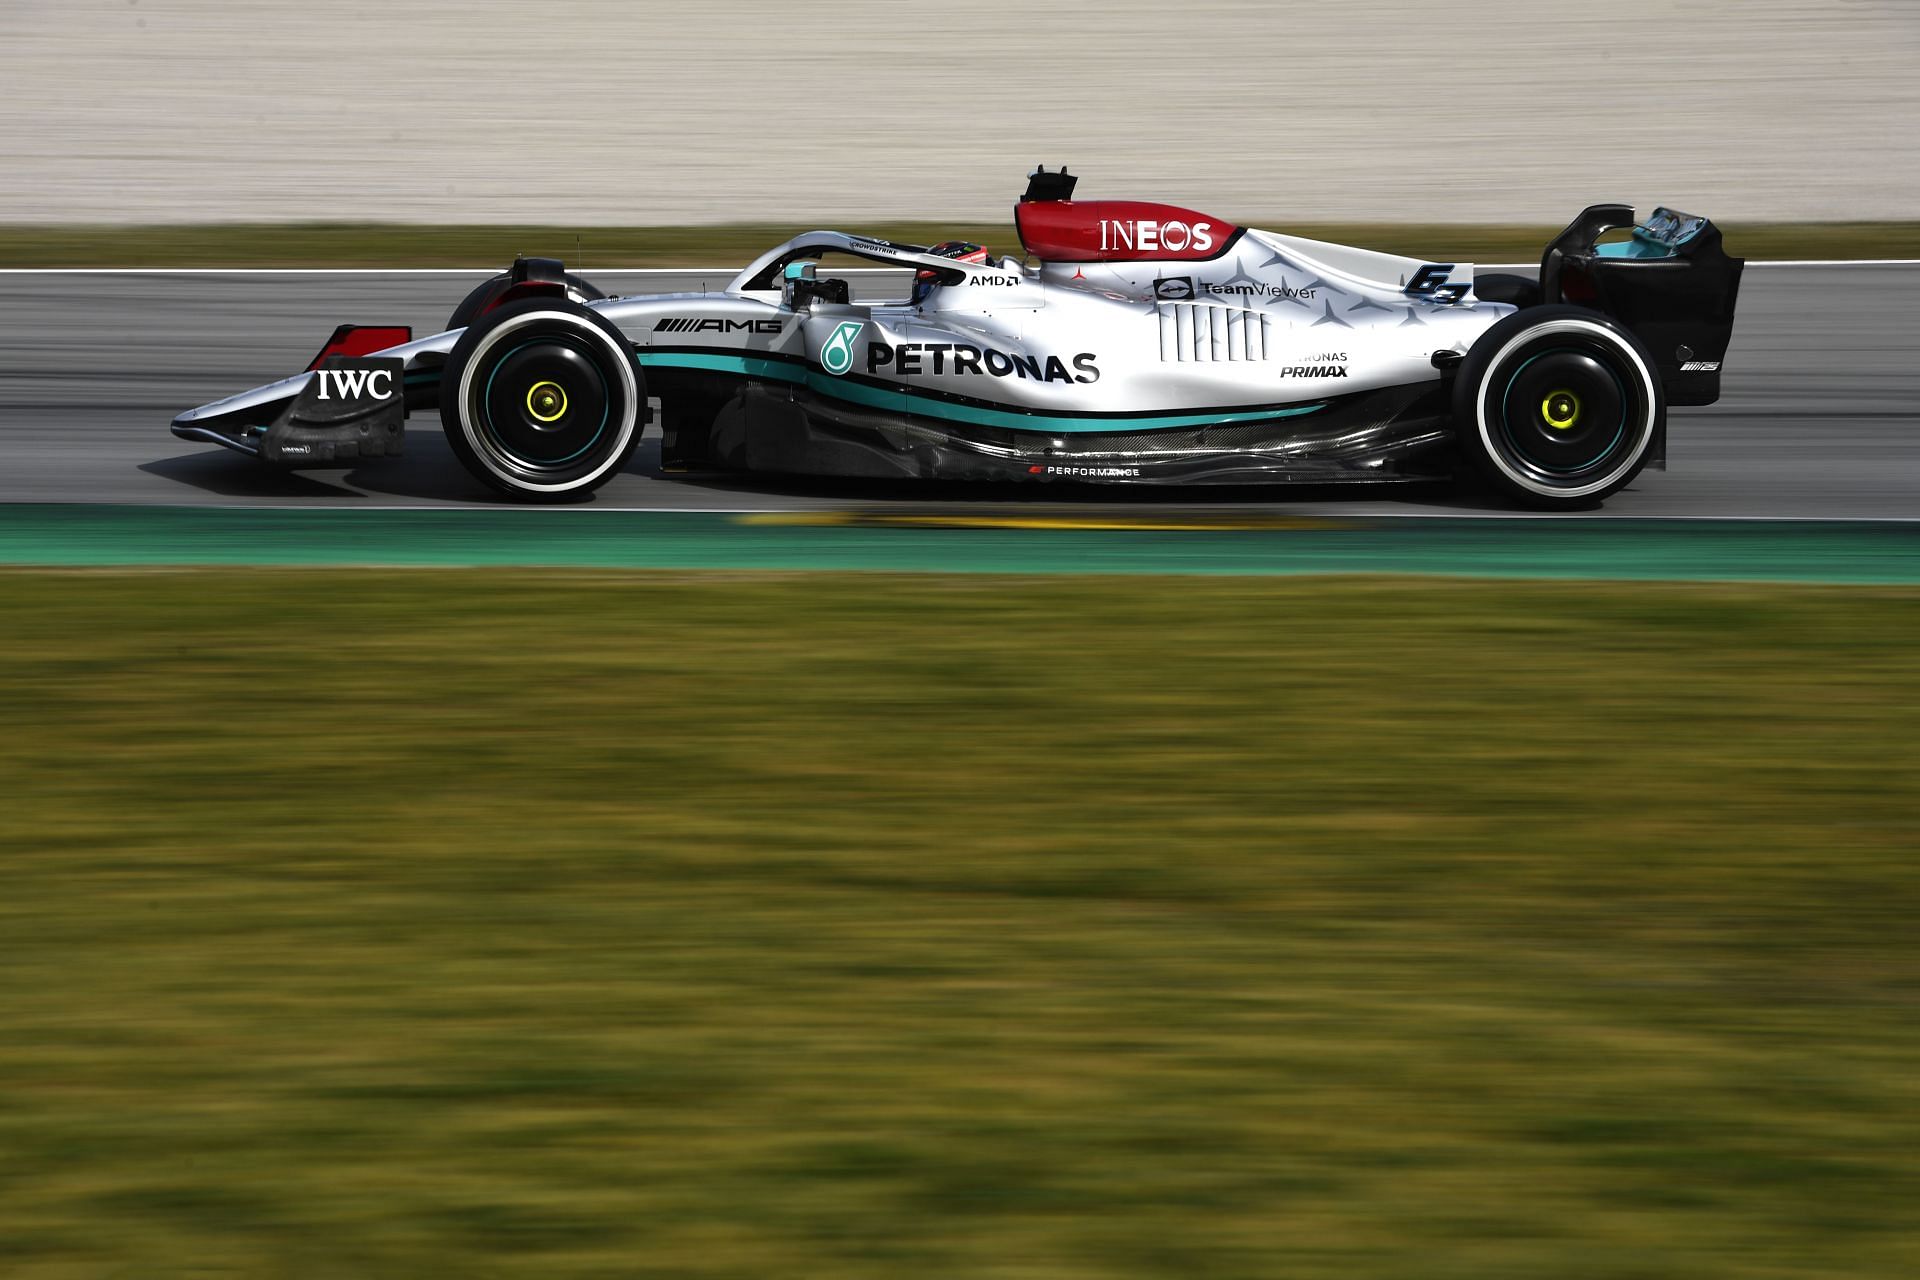 George Russell drives the Mercedes W13 during Day 2 of Formula 1 Testing in Barcelona (Photo by Rudy Carezzevoli/Getty Images)